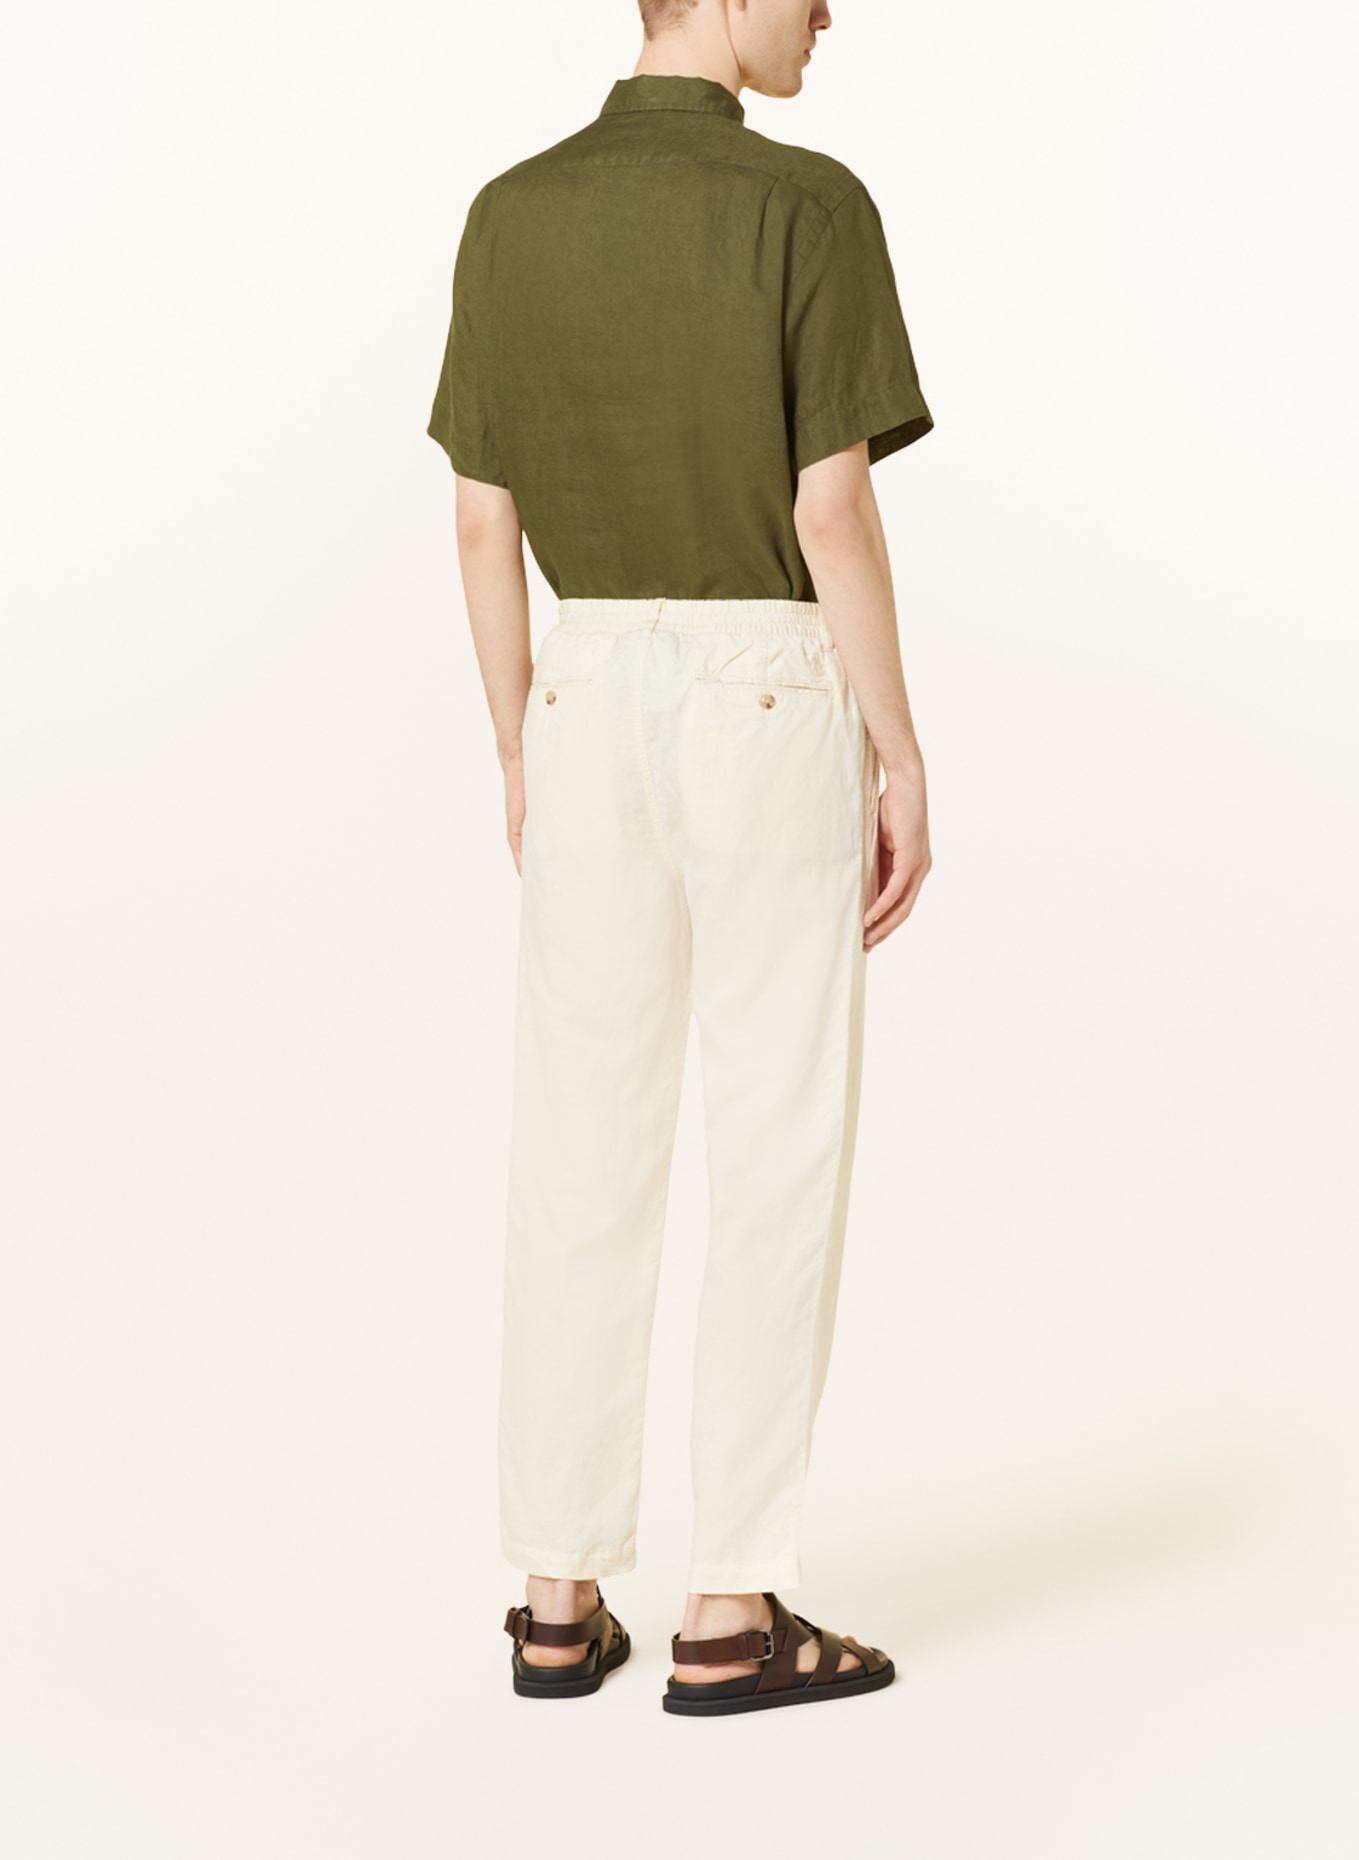 POLO RALPH LAUREN Short sleeve shirt classic fit in linen, Color: OLIVE (Image 3)